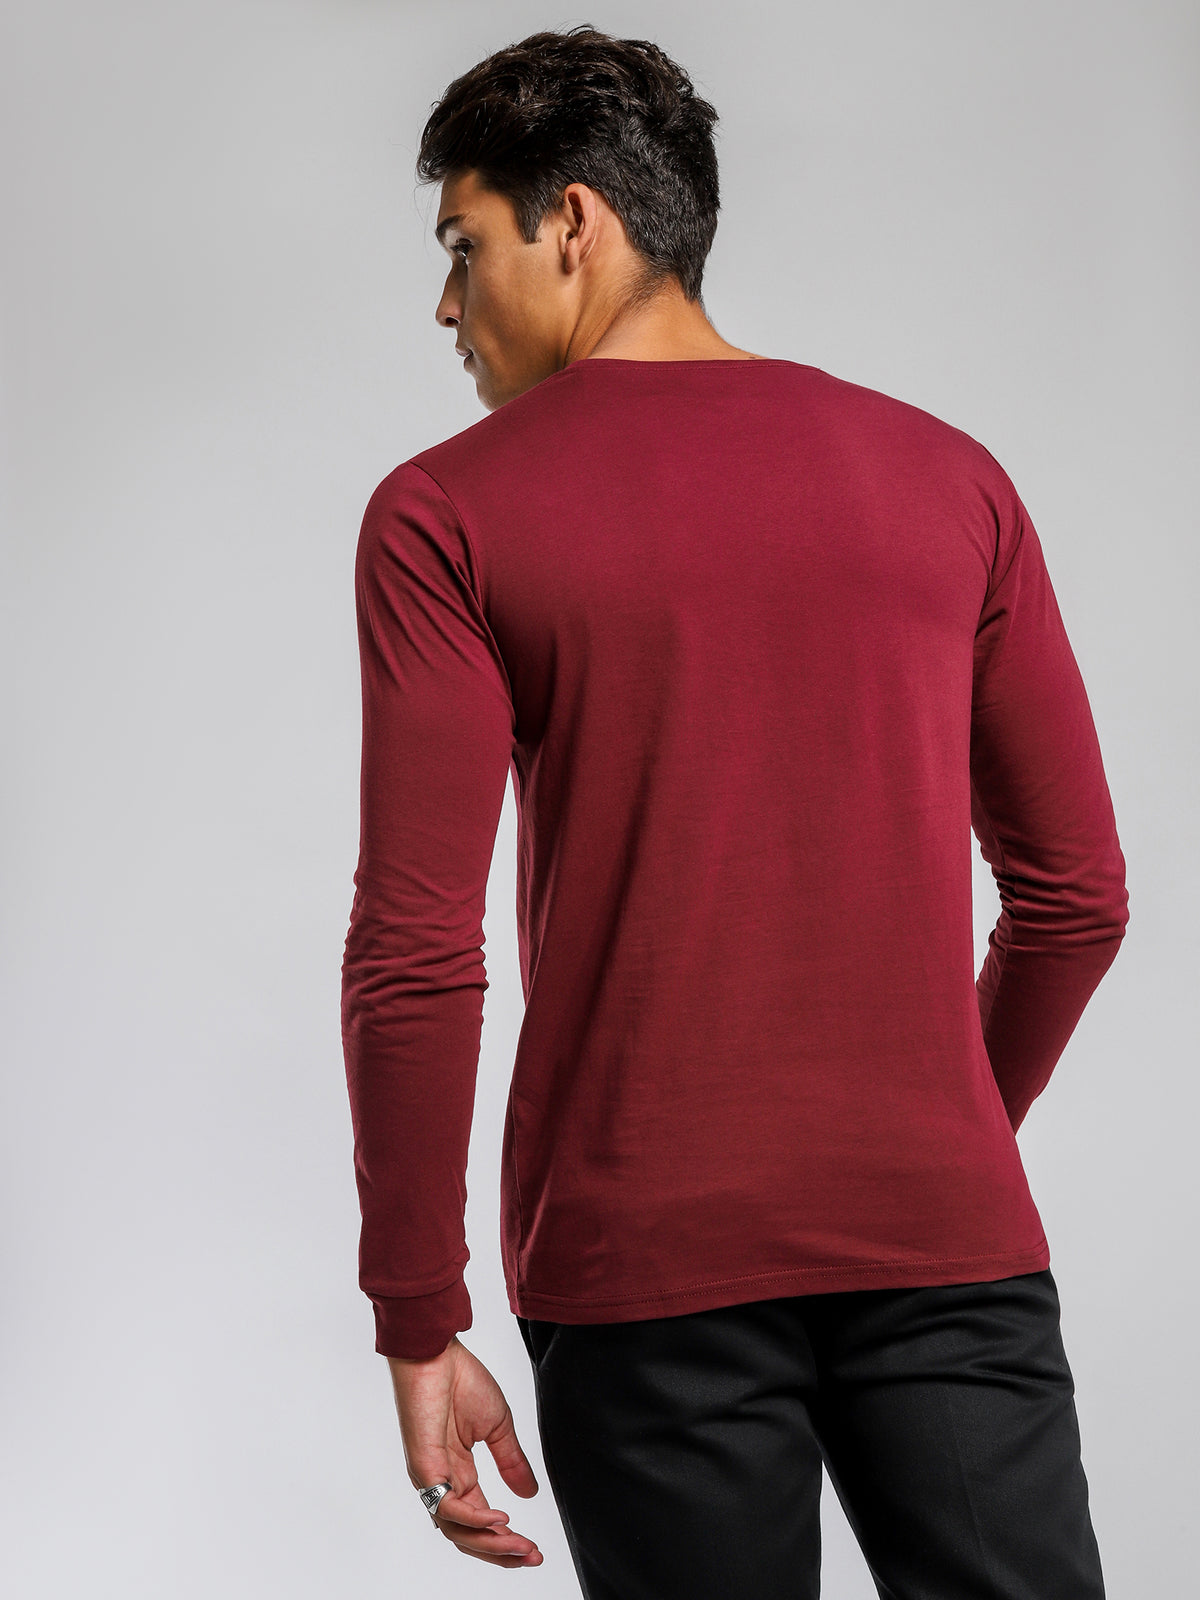 Contra Long Sleeve T-Shirt in Burgundy